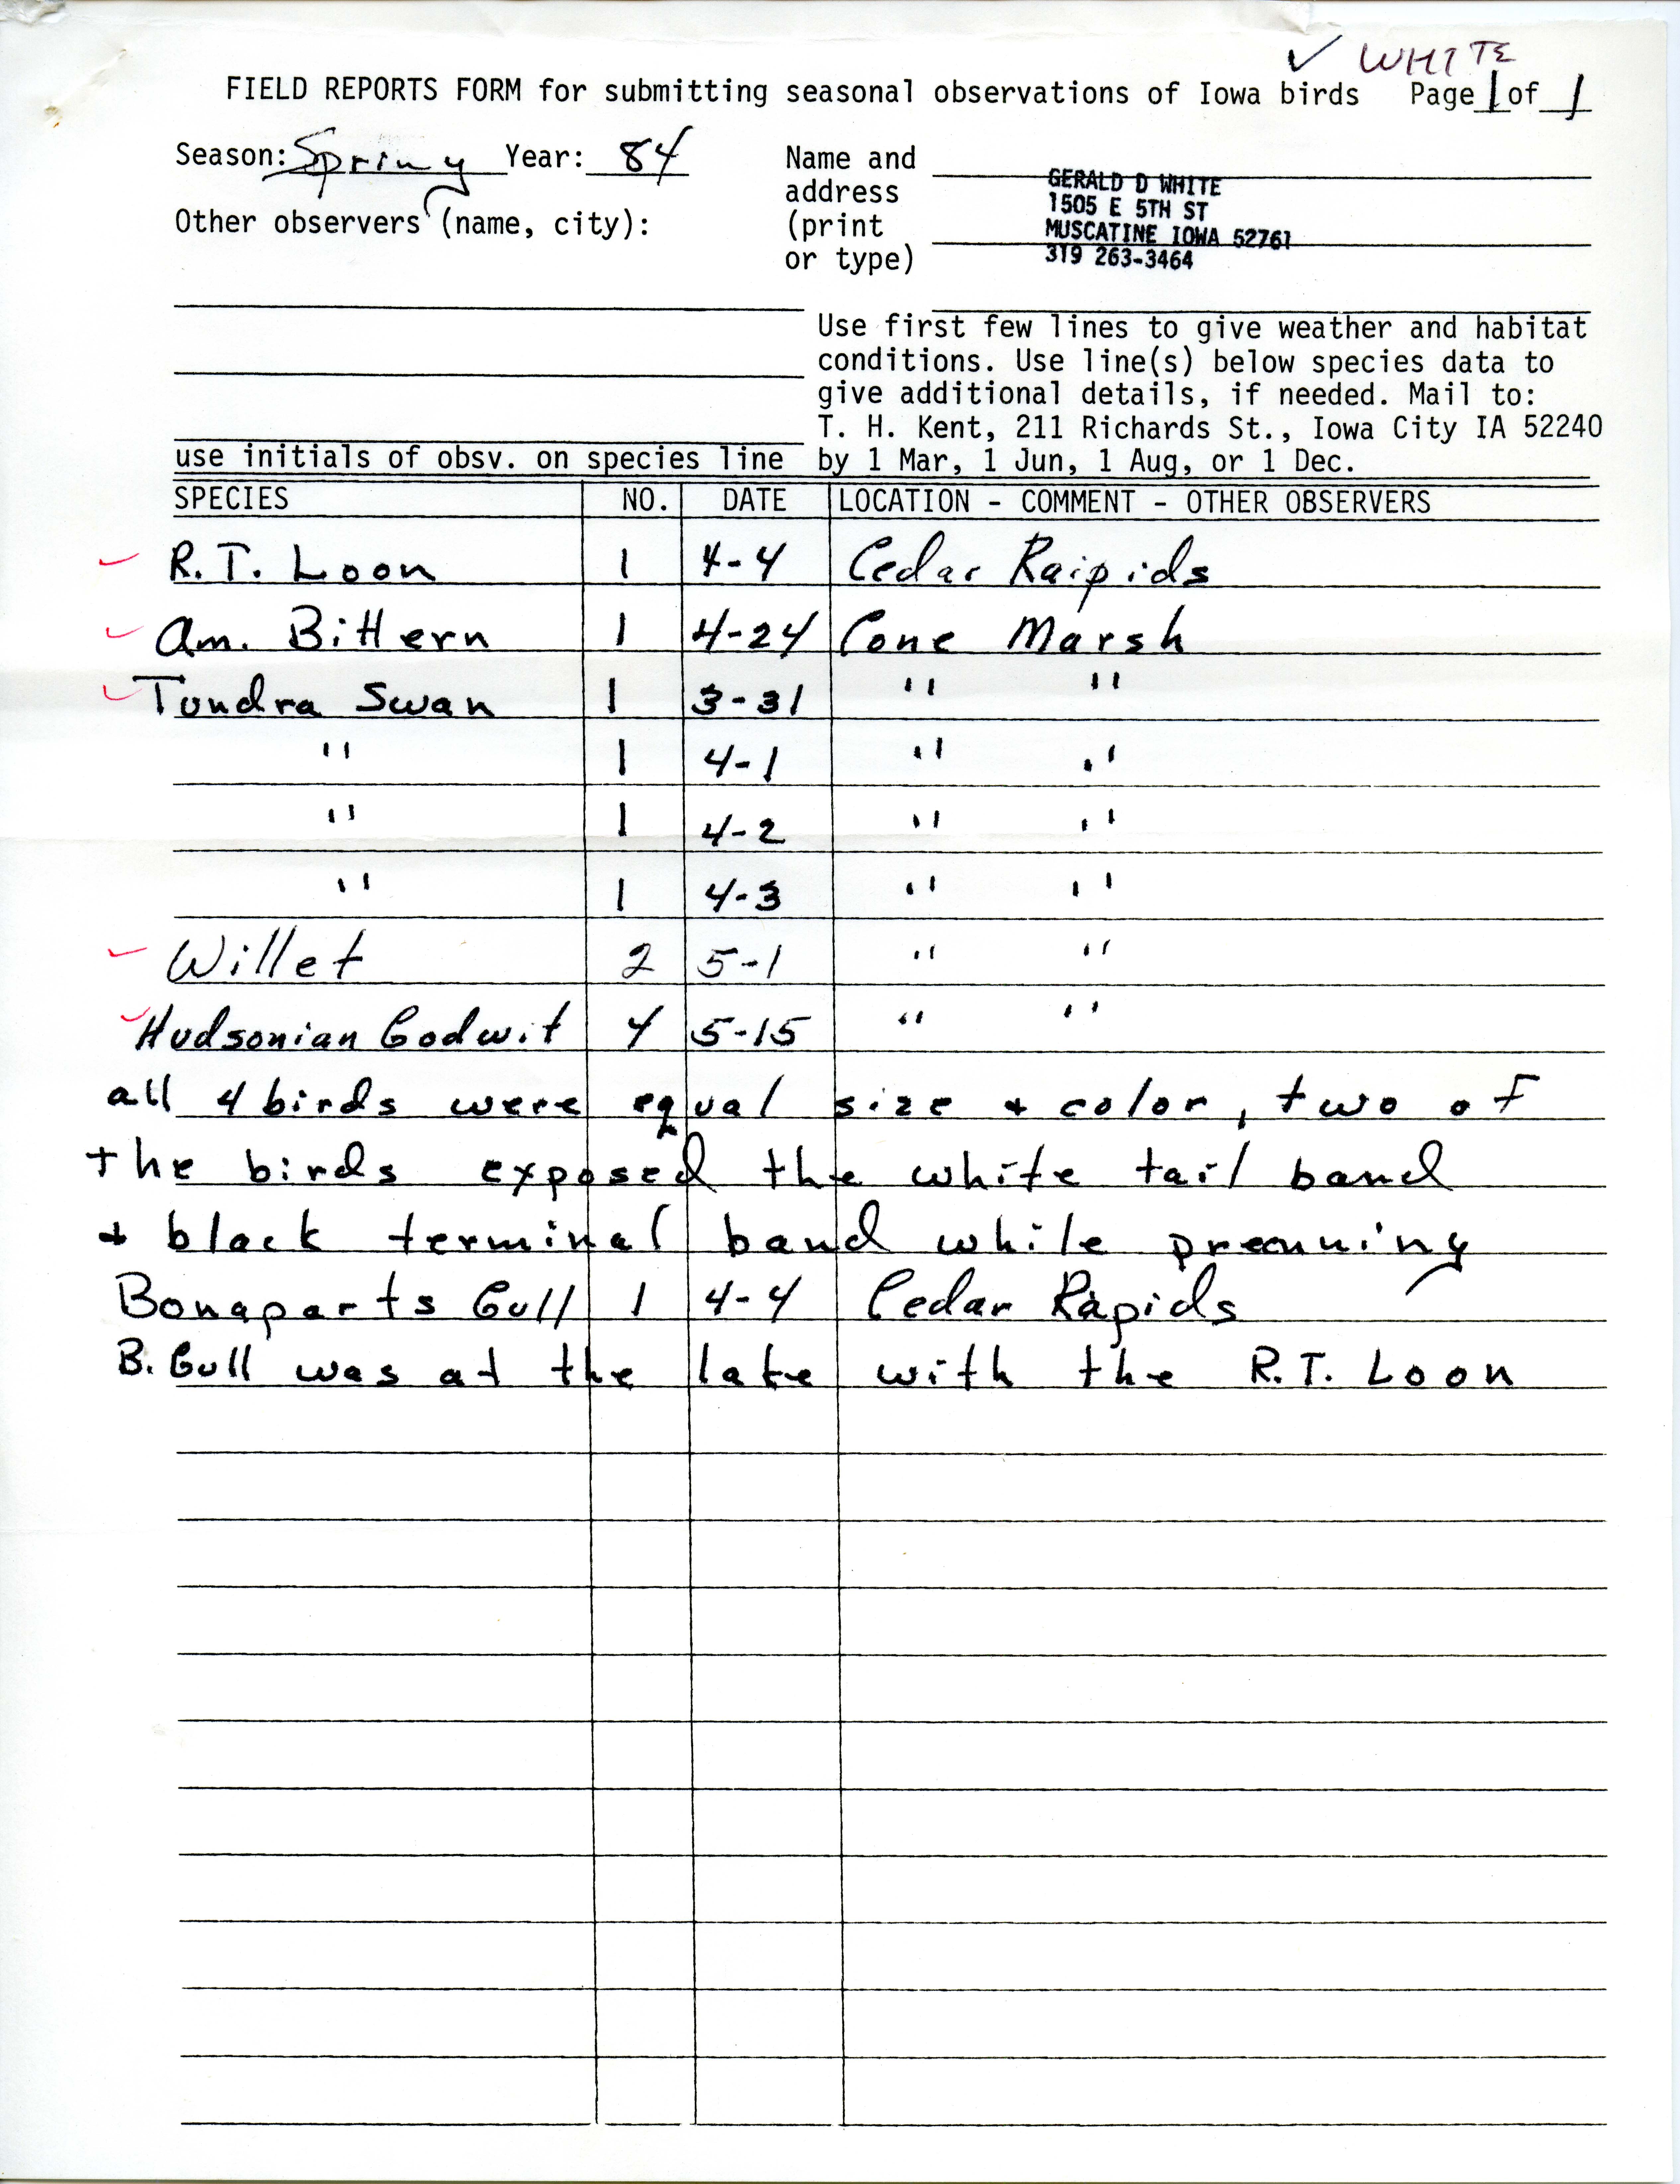 Field notes contributed by Gerald White, spring 1984